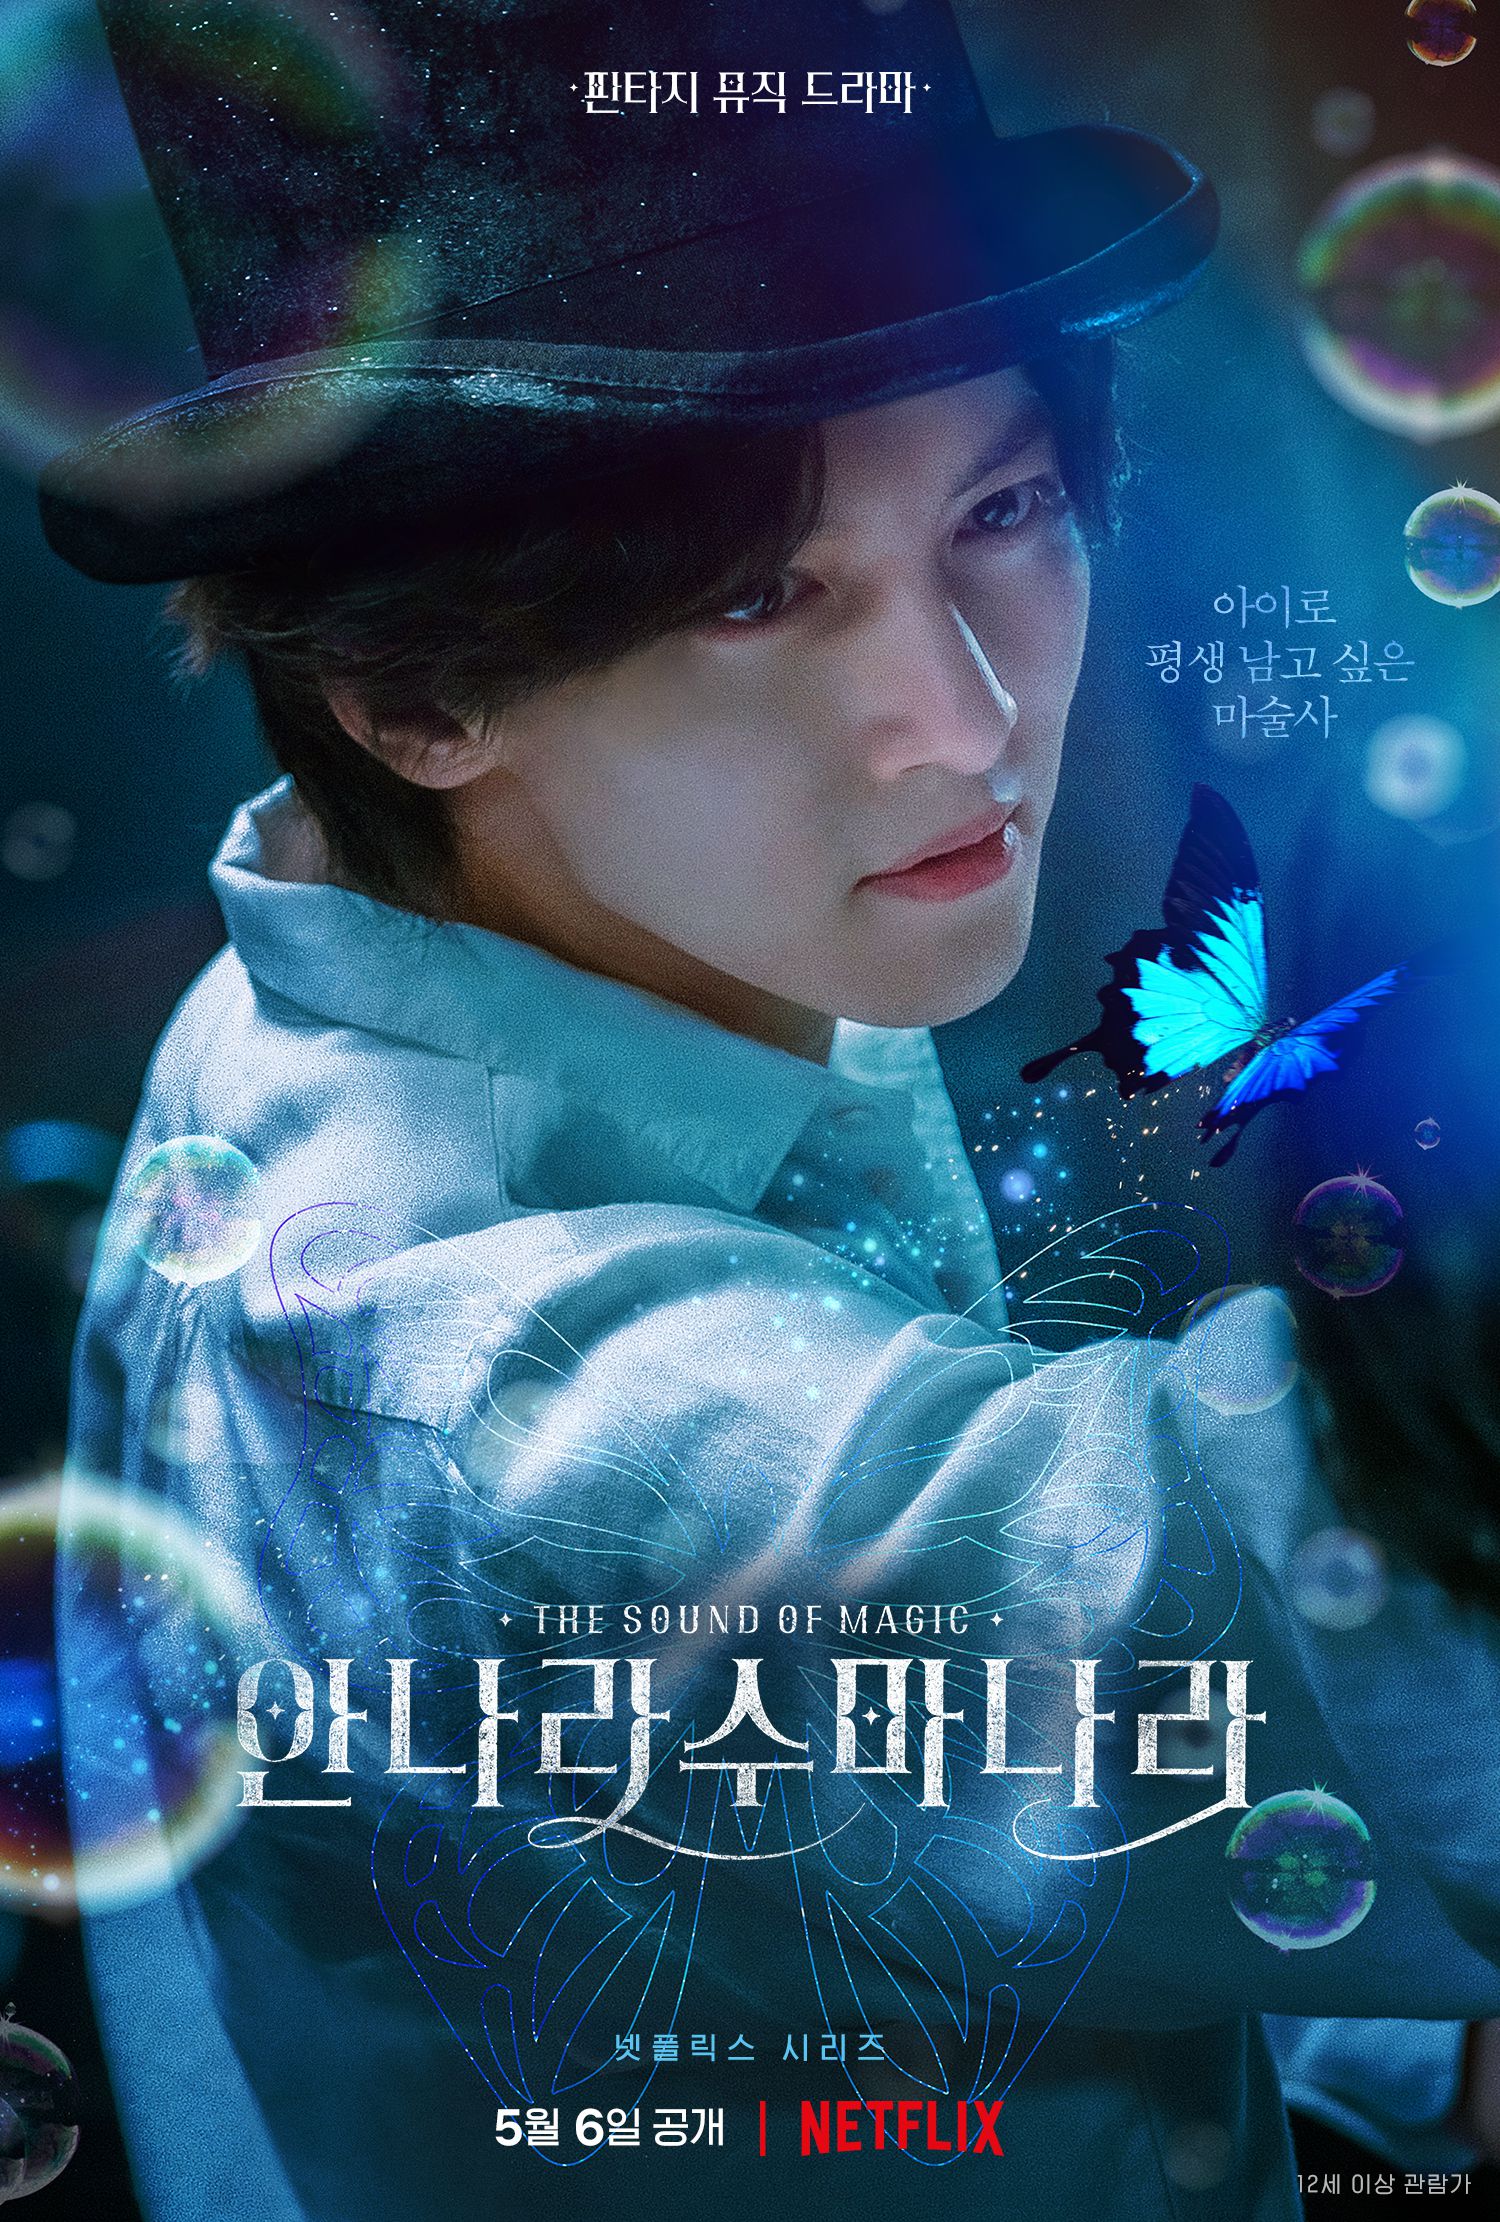 Ji Chang Wook's ravishing visual in the new movie: Both mysterious and romantic, it makes you feel fluttery - Photo 1.